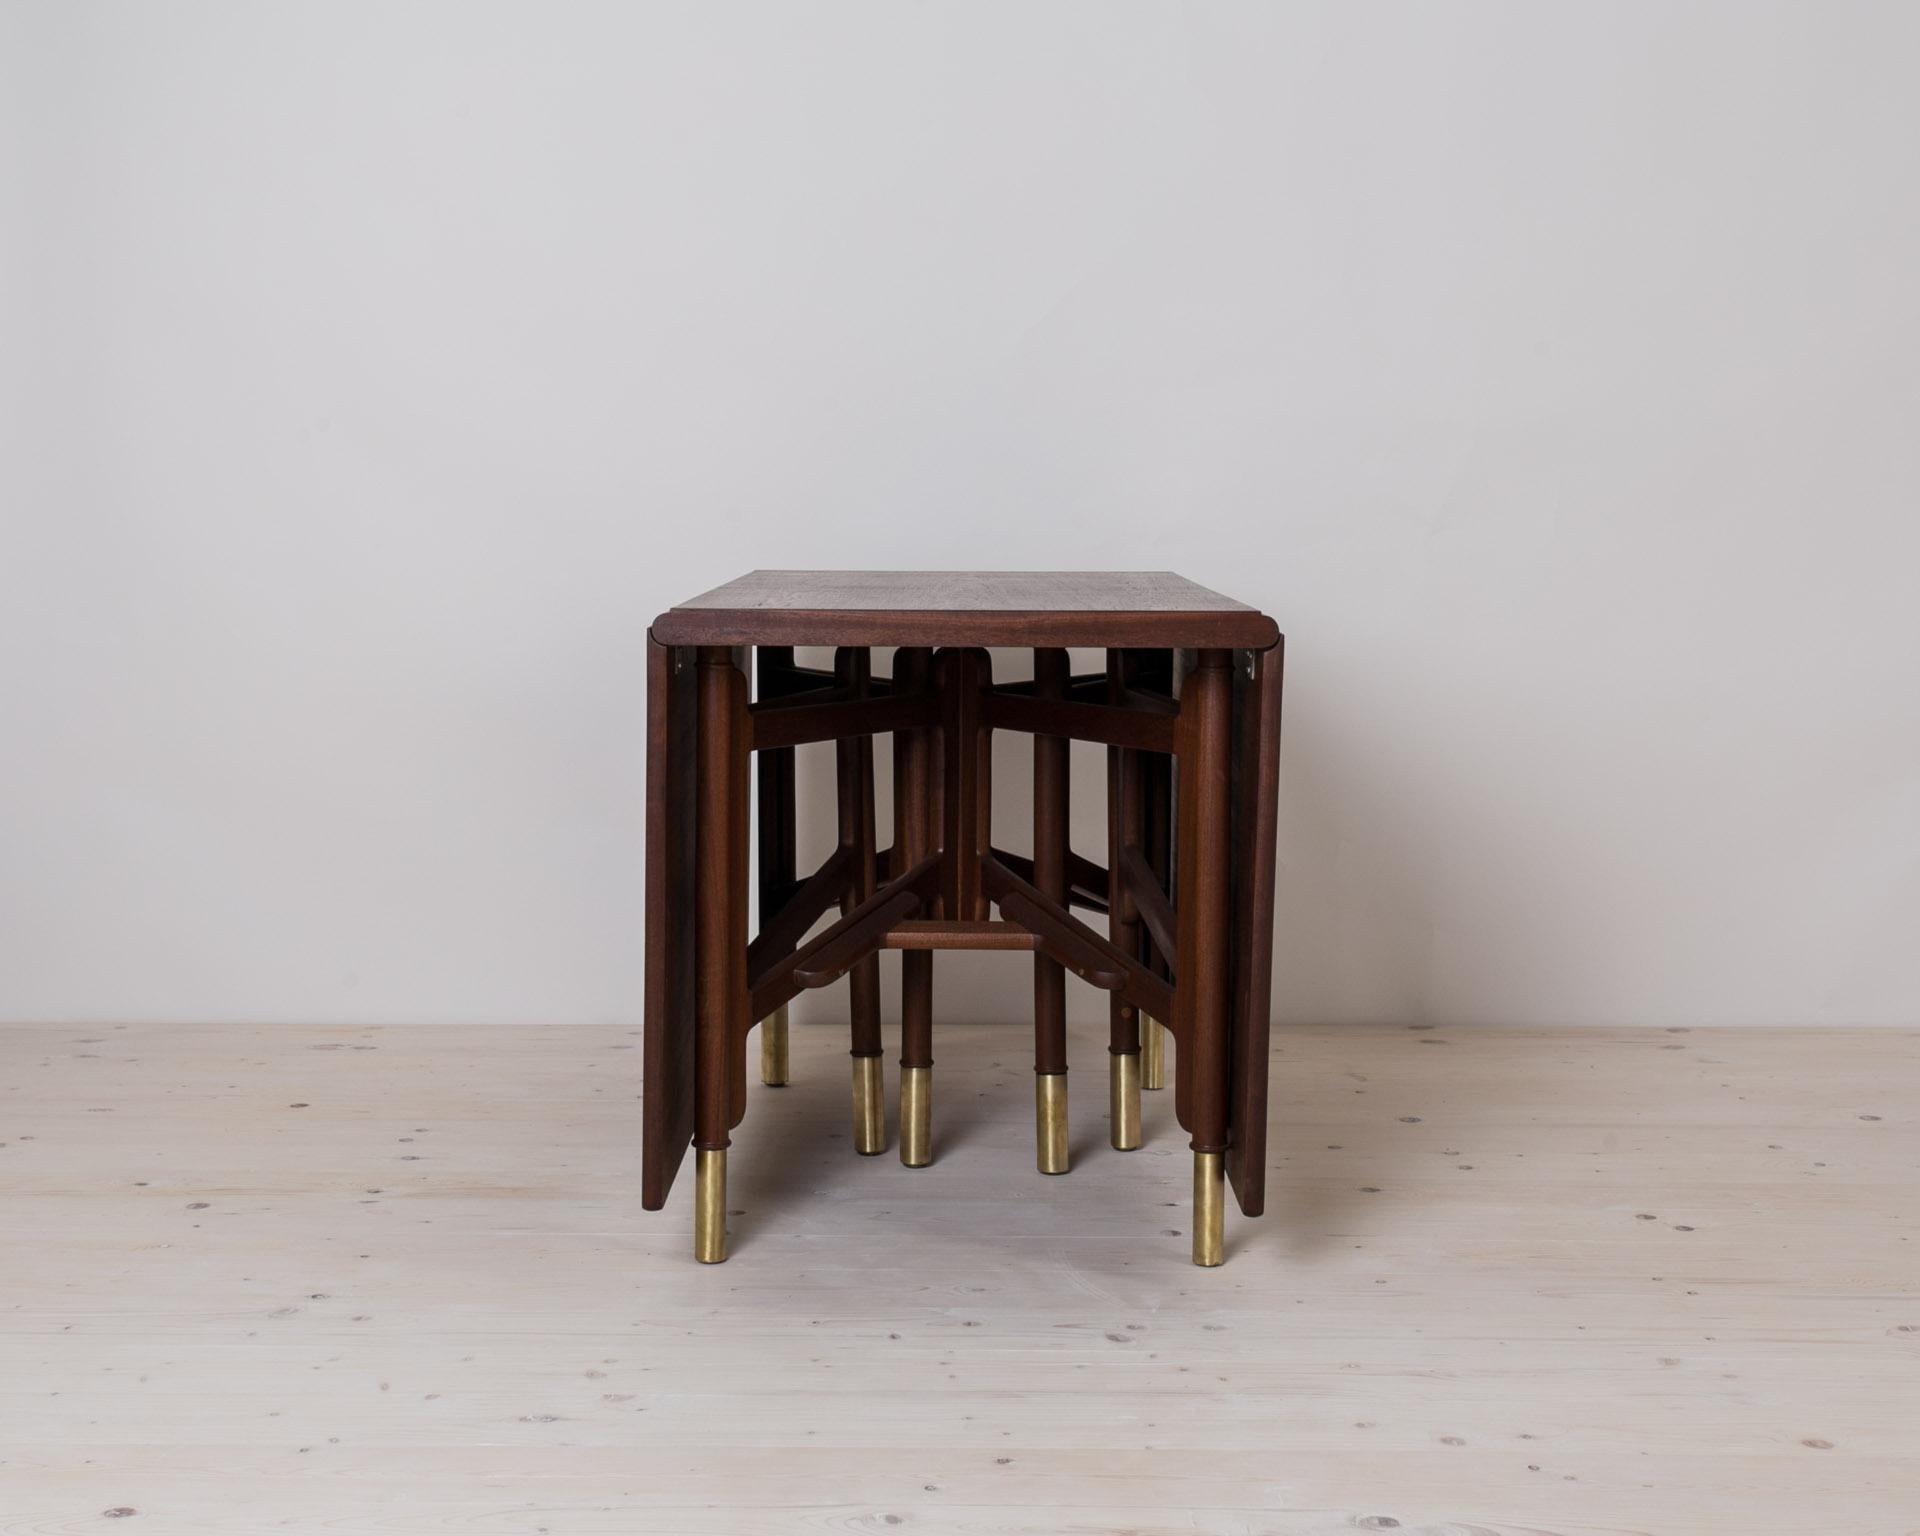 Mid-20th Century Midcentury Dining Table, Teak Wood, Brass Elements, Norway, 1950s For Sale